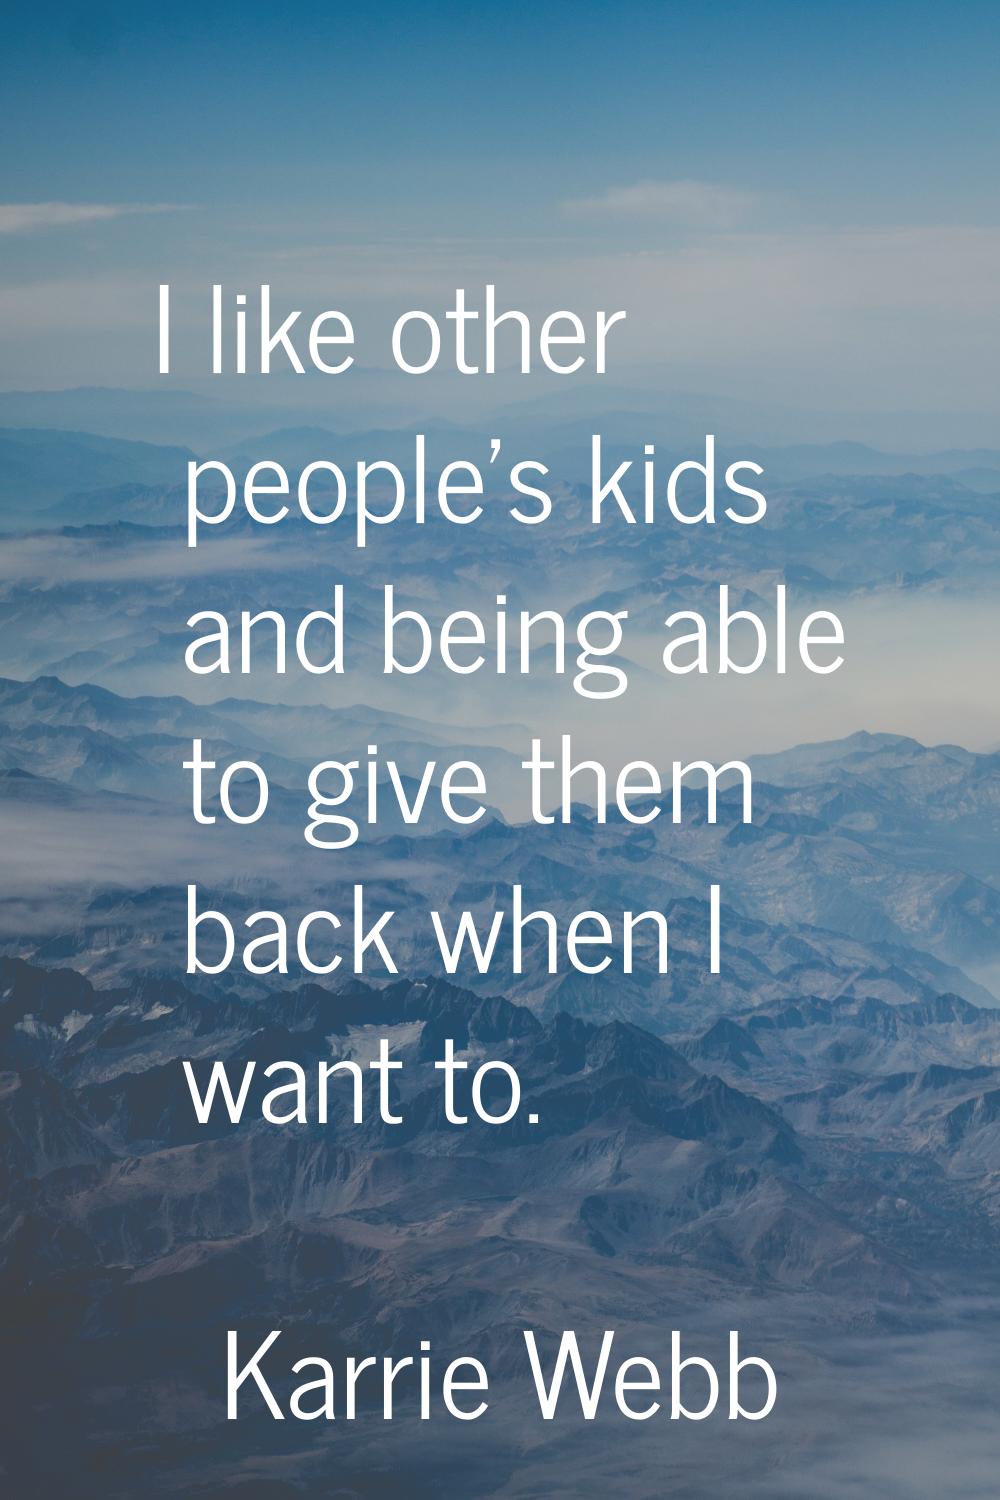 I like other people's kids and being able to give them back when I want to.